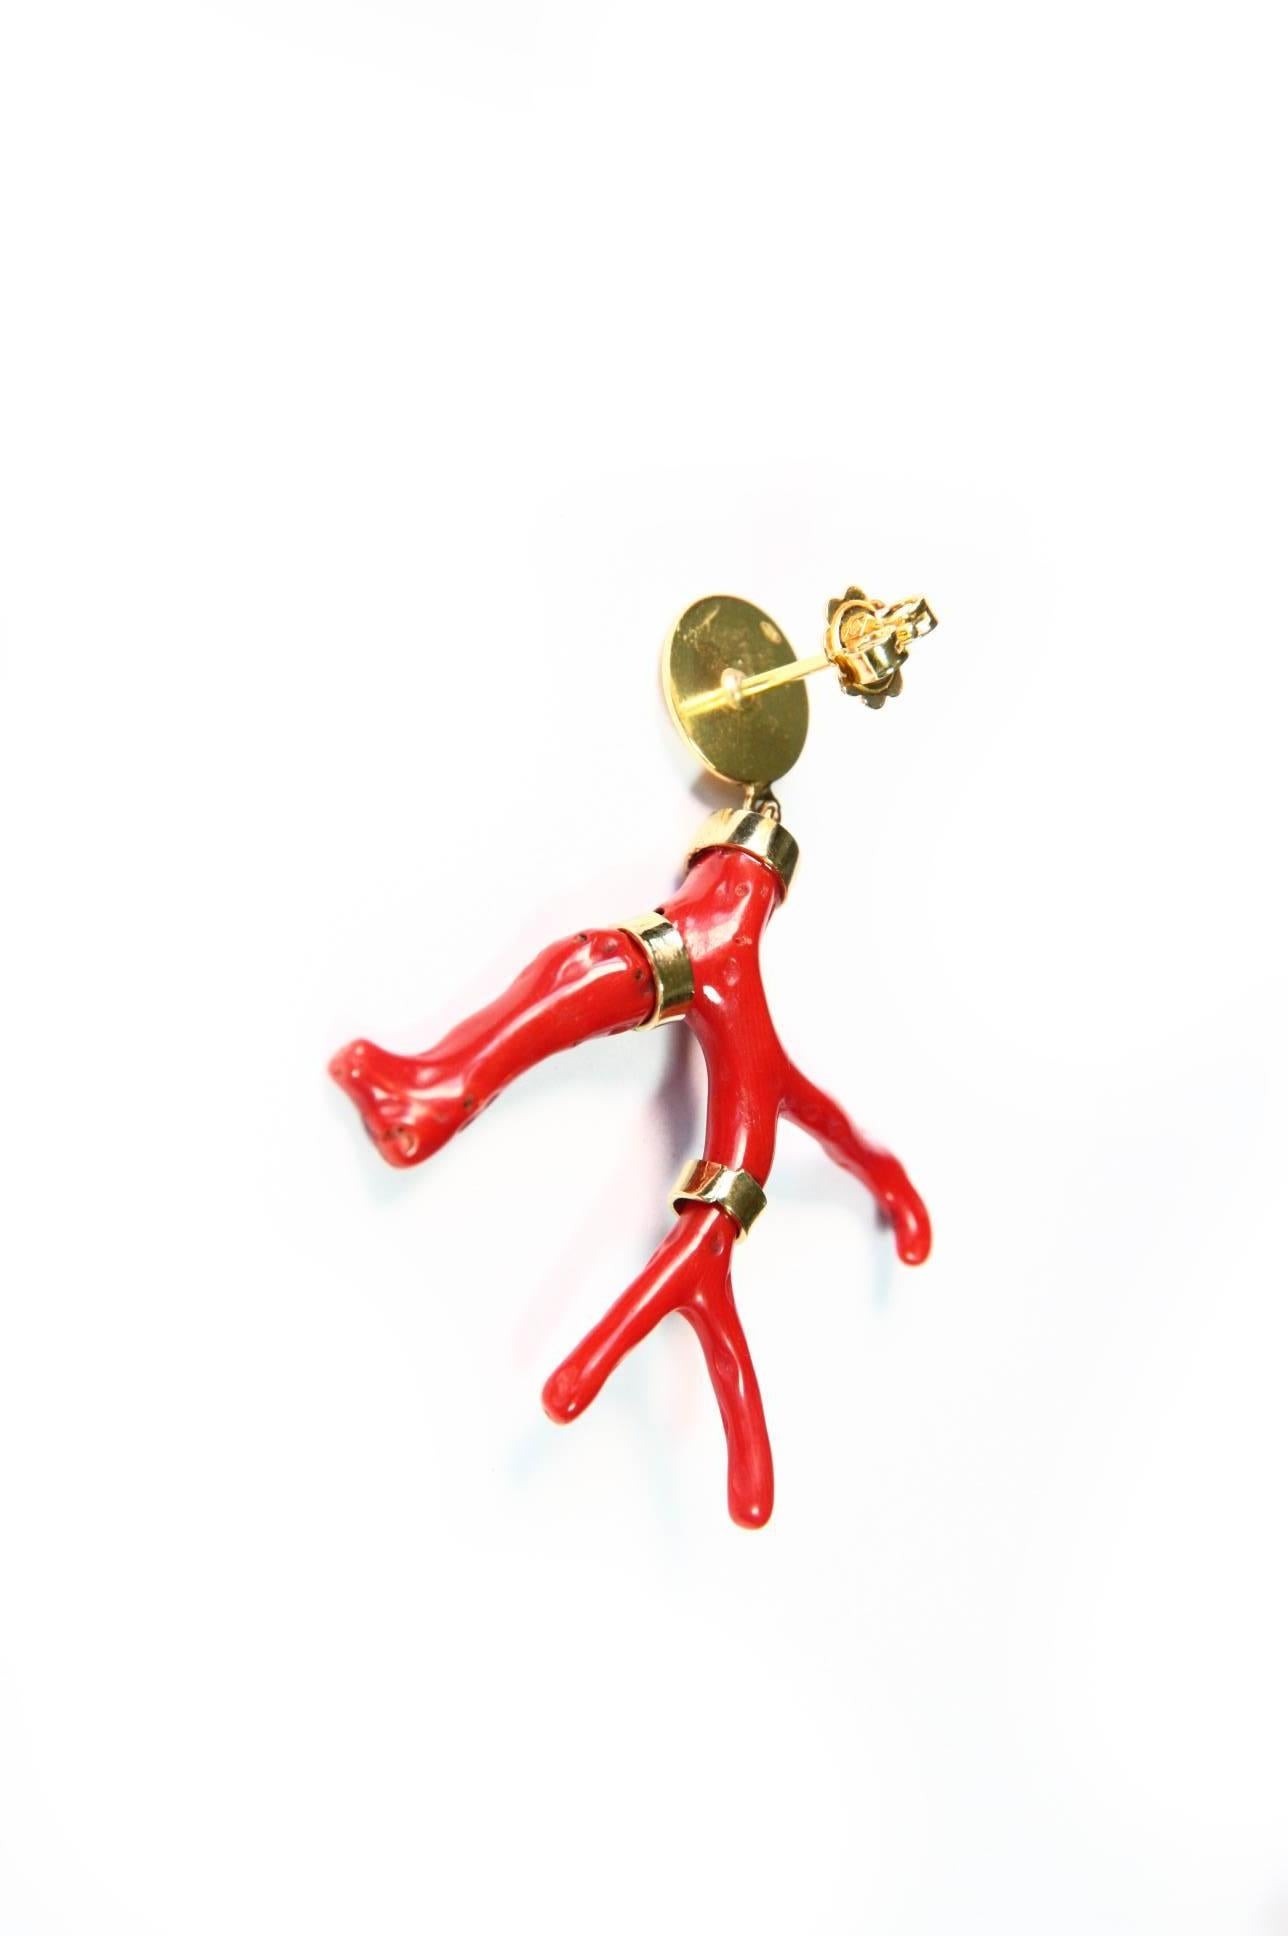 Very nice natural red Italian coral branch earrings.
18 kt Gold gr 2,90. Total length 5cm weight 6 gr. each.
All Giulia Colussi jewelry is new and has never been previously owned or worn. Each item will arrive at your door beautifully gift wrapped